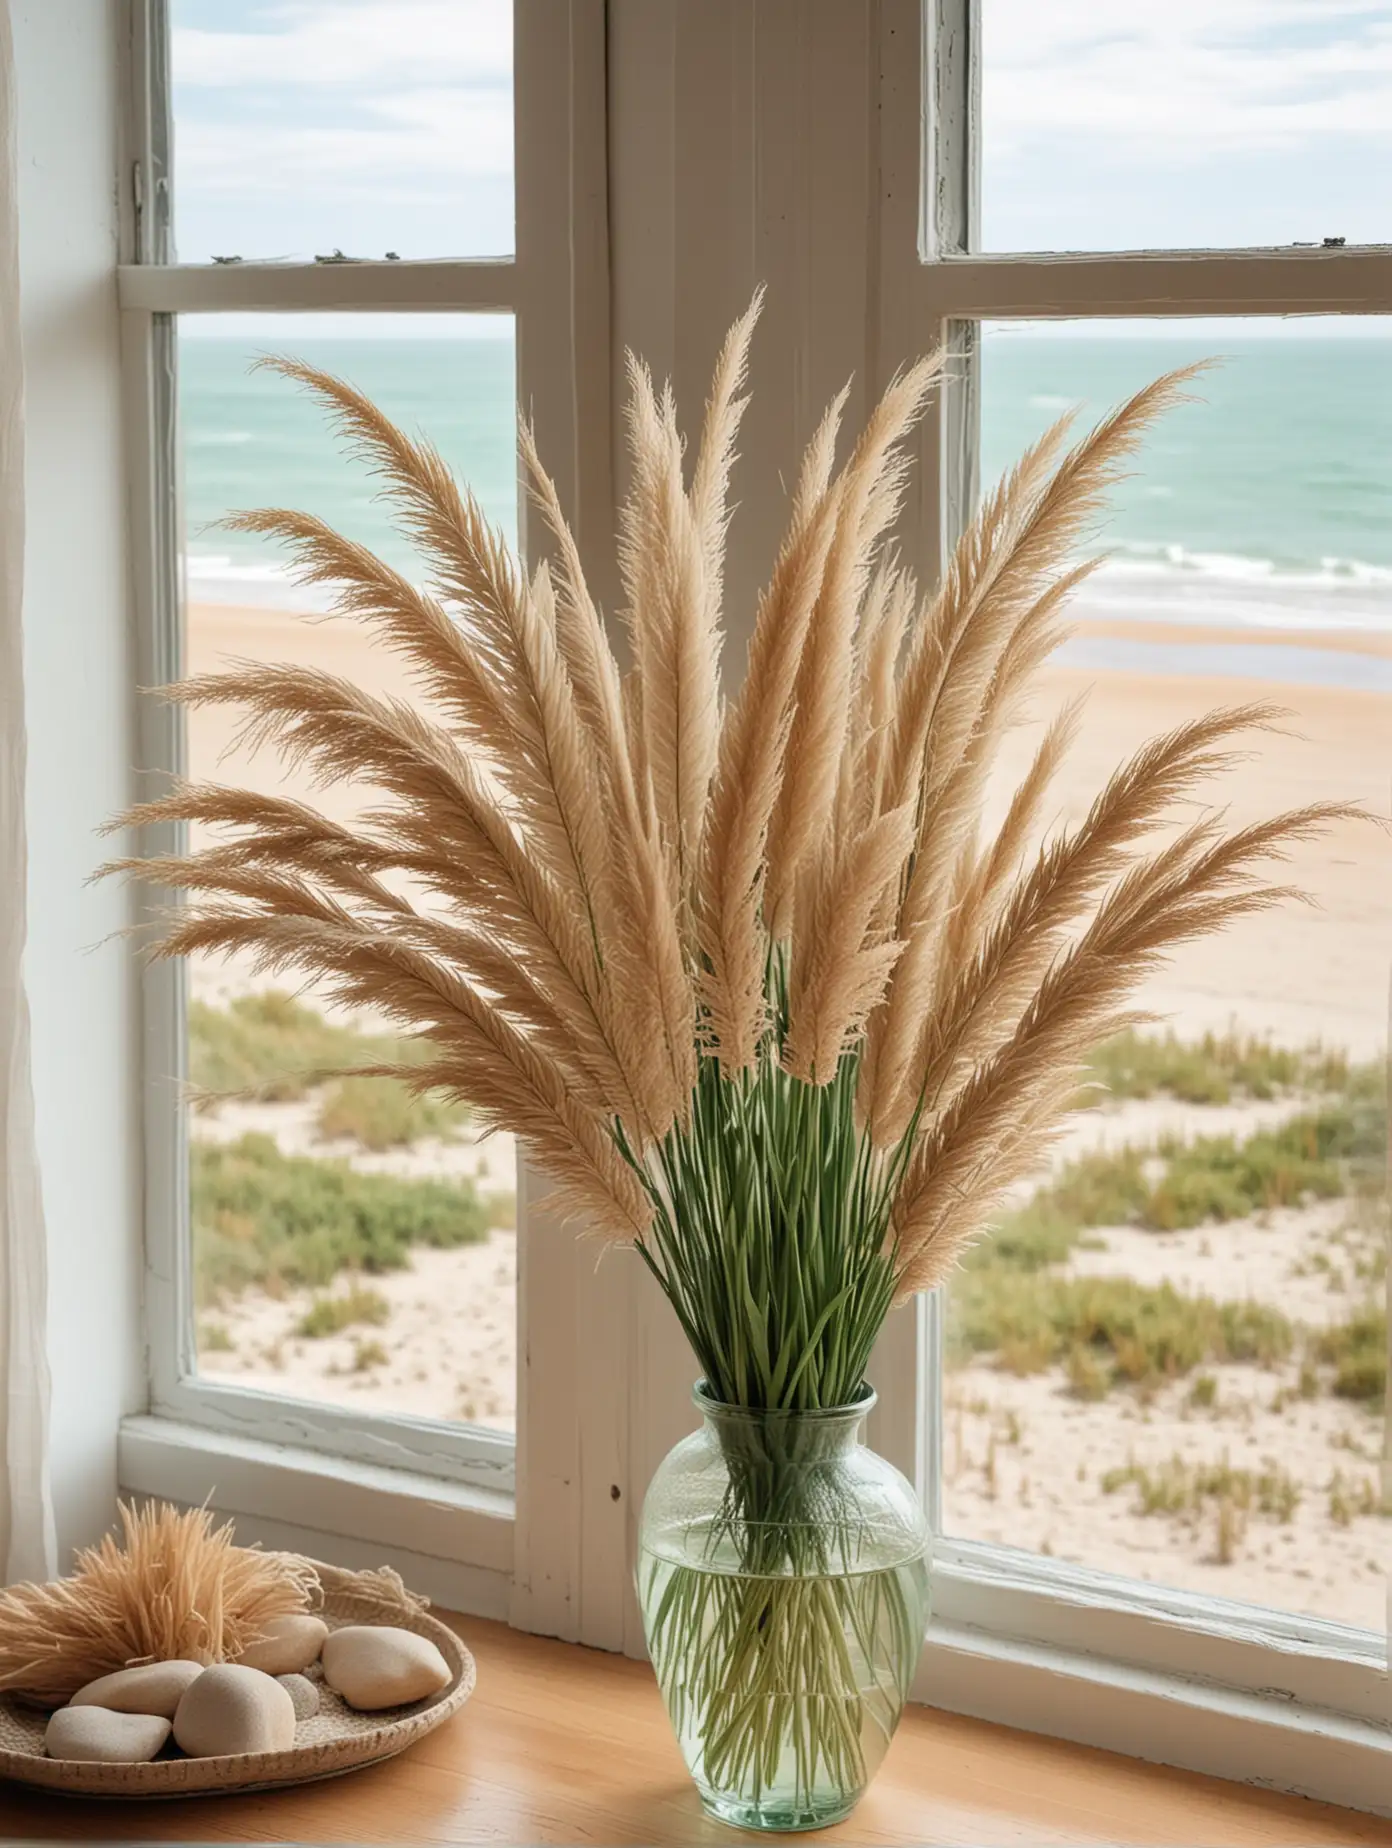 detailed pampas photo, in vase with green pastel colors, next to clean window with a view of a beach